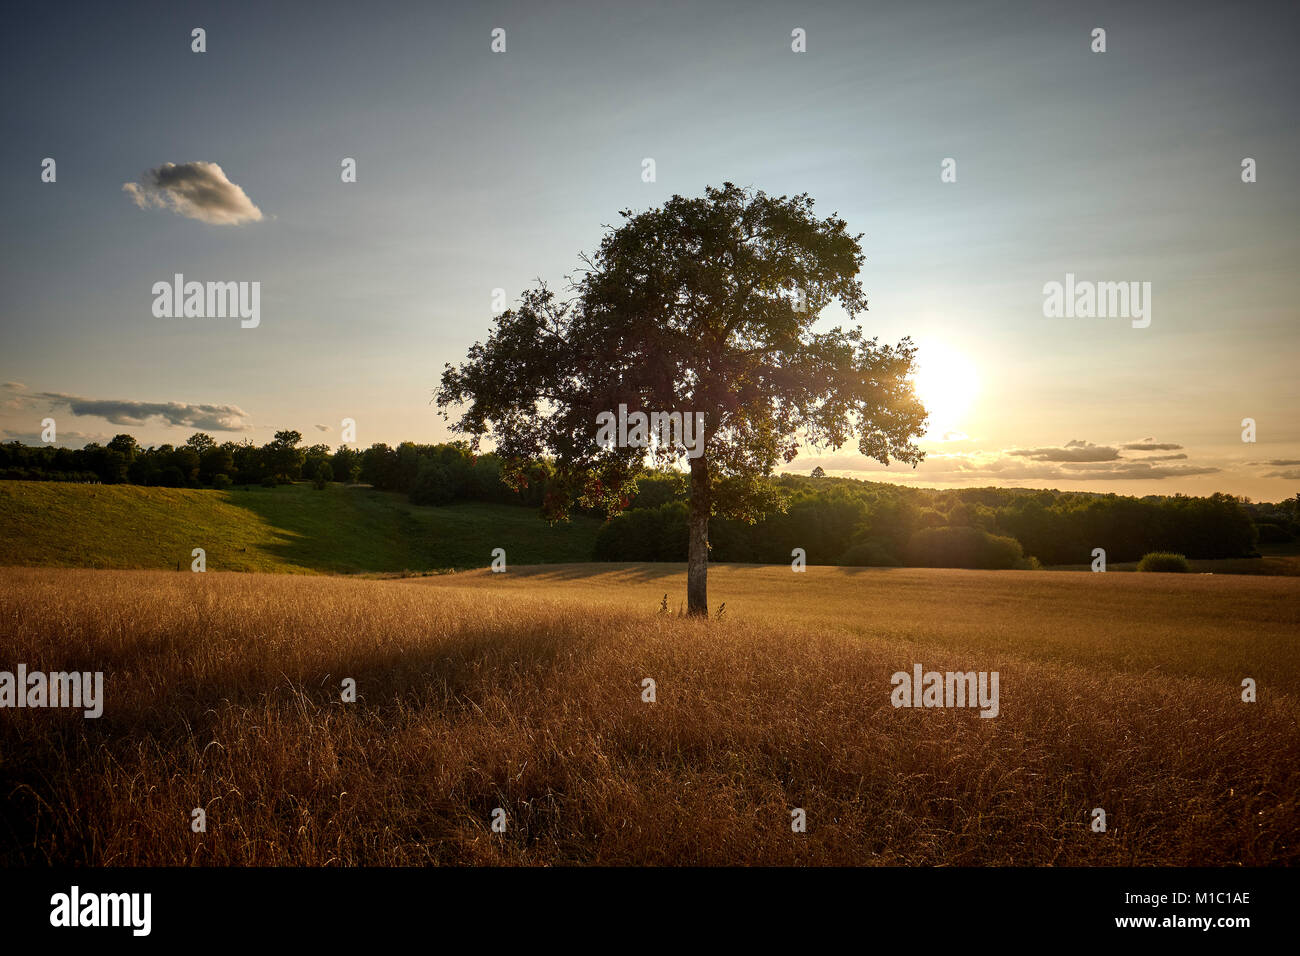 A back lit tree in a field in the late summer sun. Stock Photo